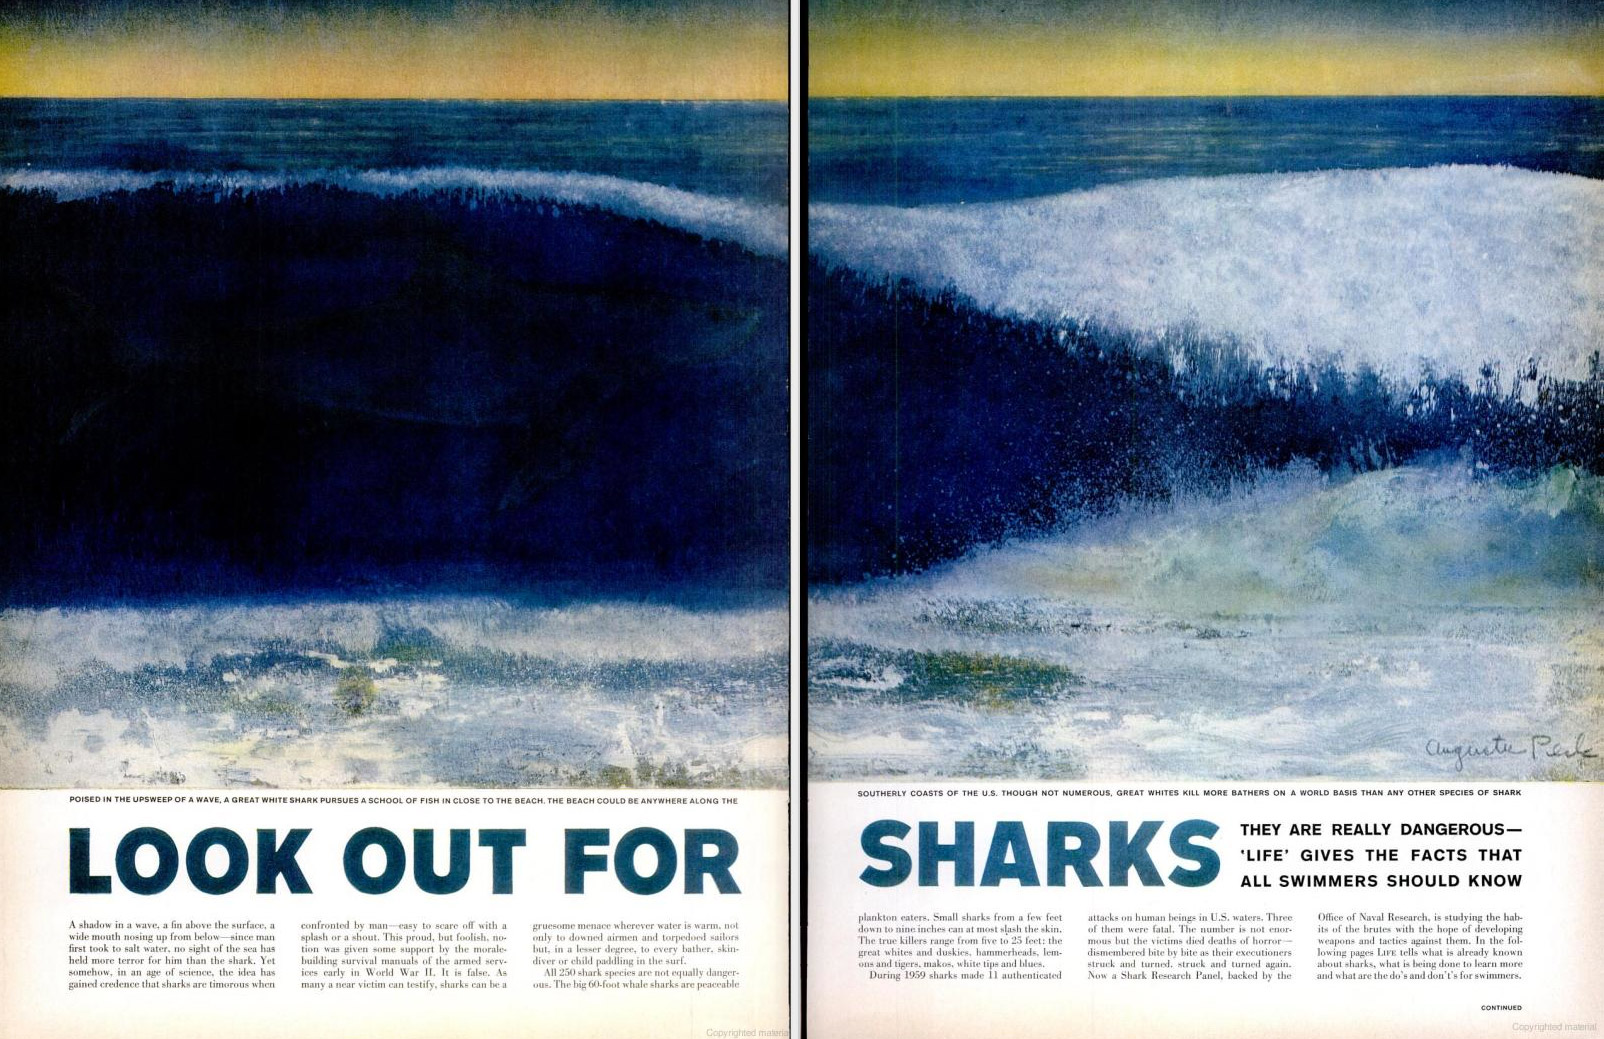 Page layout from the July 11, 1960 issue of LIFE Magazine.